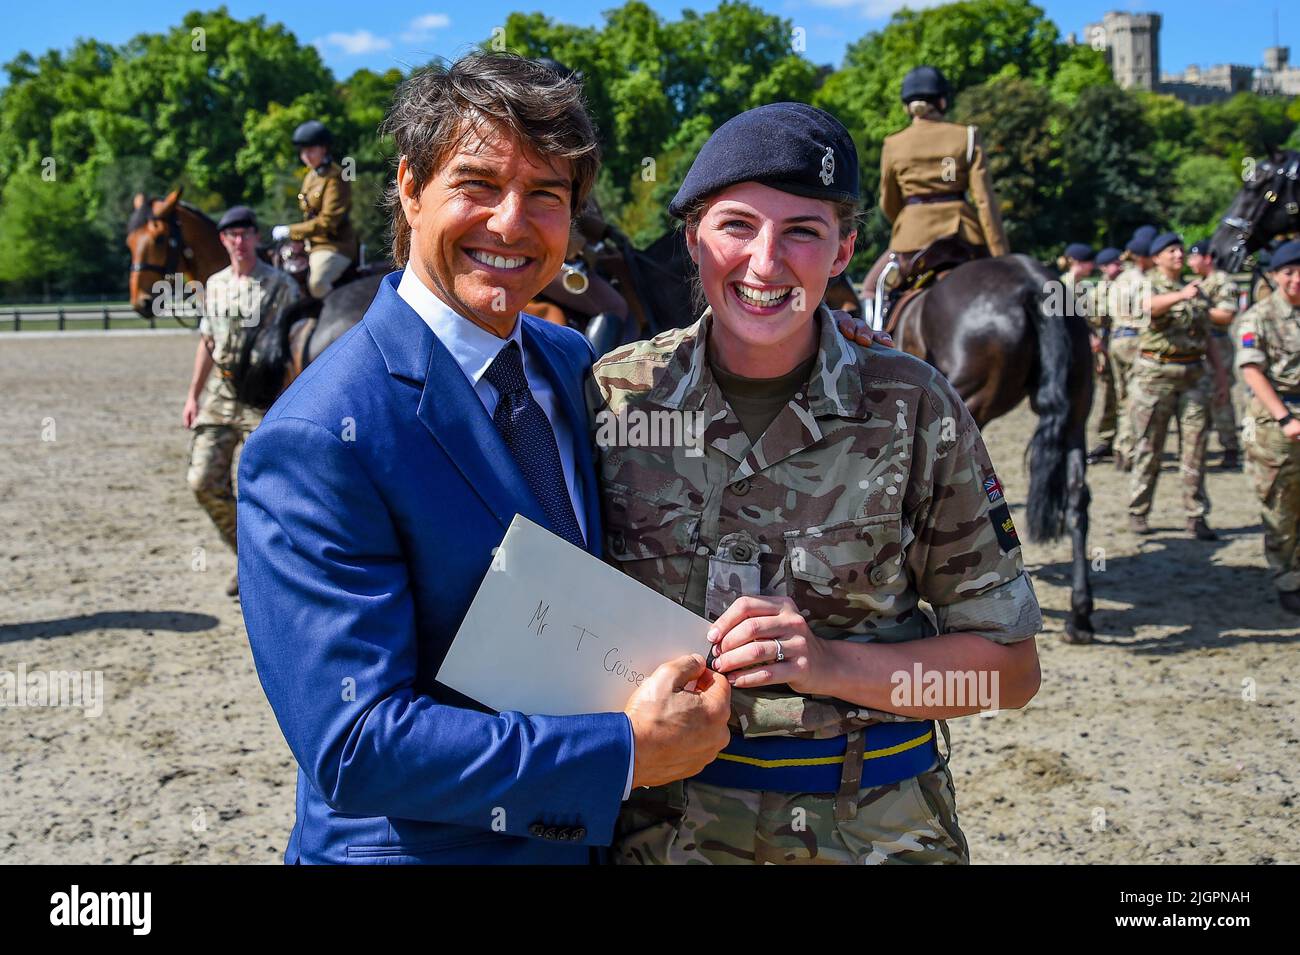 Windsor Castle, Windsor, Berkshire, UK. 8th July 2022. EMBARGOED UNTIL 12th JULY  Tom Cruise being given a wedding invitation by Jess Young during his visit to meet members of the King's Troop Royal Horse Artillery, which Tom introduced back in May, during the Platinum Jubilee Celebration, on a private visit in the Private Grounds of Windsor Castle   Credit:Peter Nixon/Alamy Live News Stock Photo